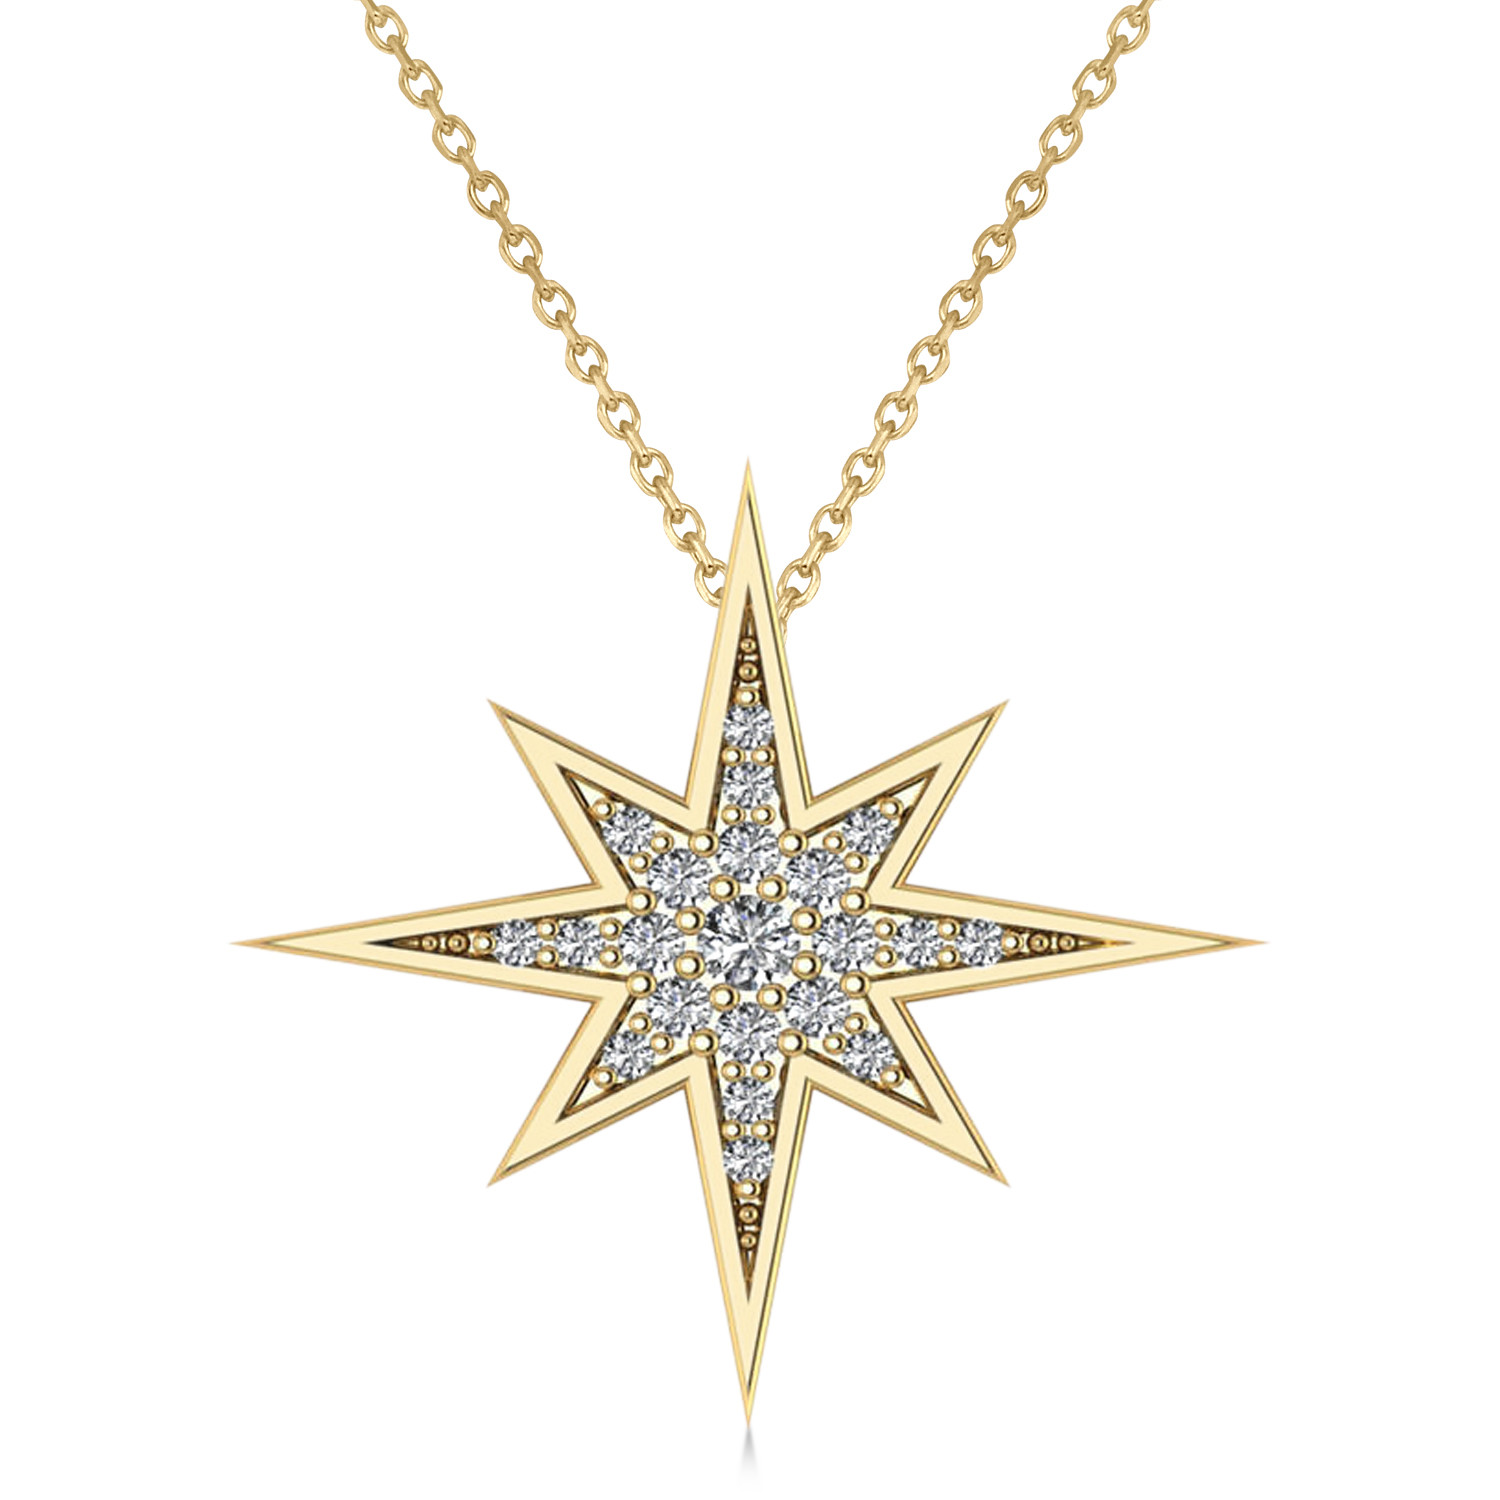 North Star Necklace
 Diamond Adorned North Star Pendant Necklace 14k Yellow